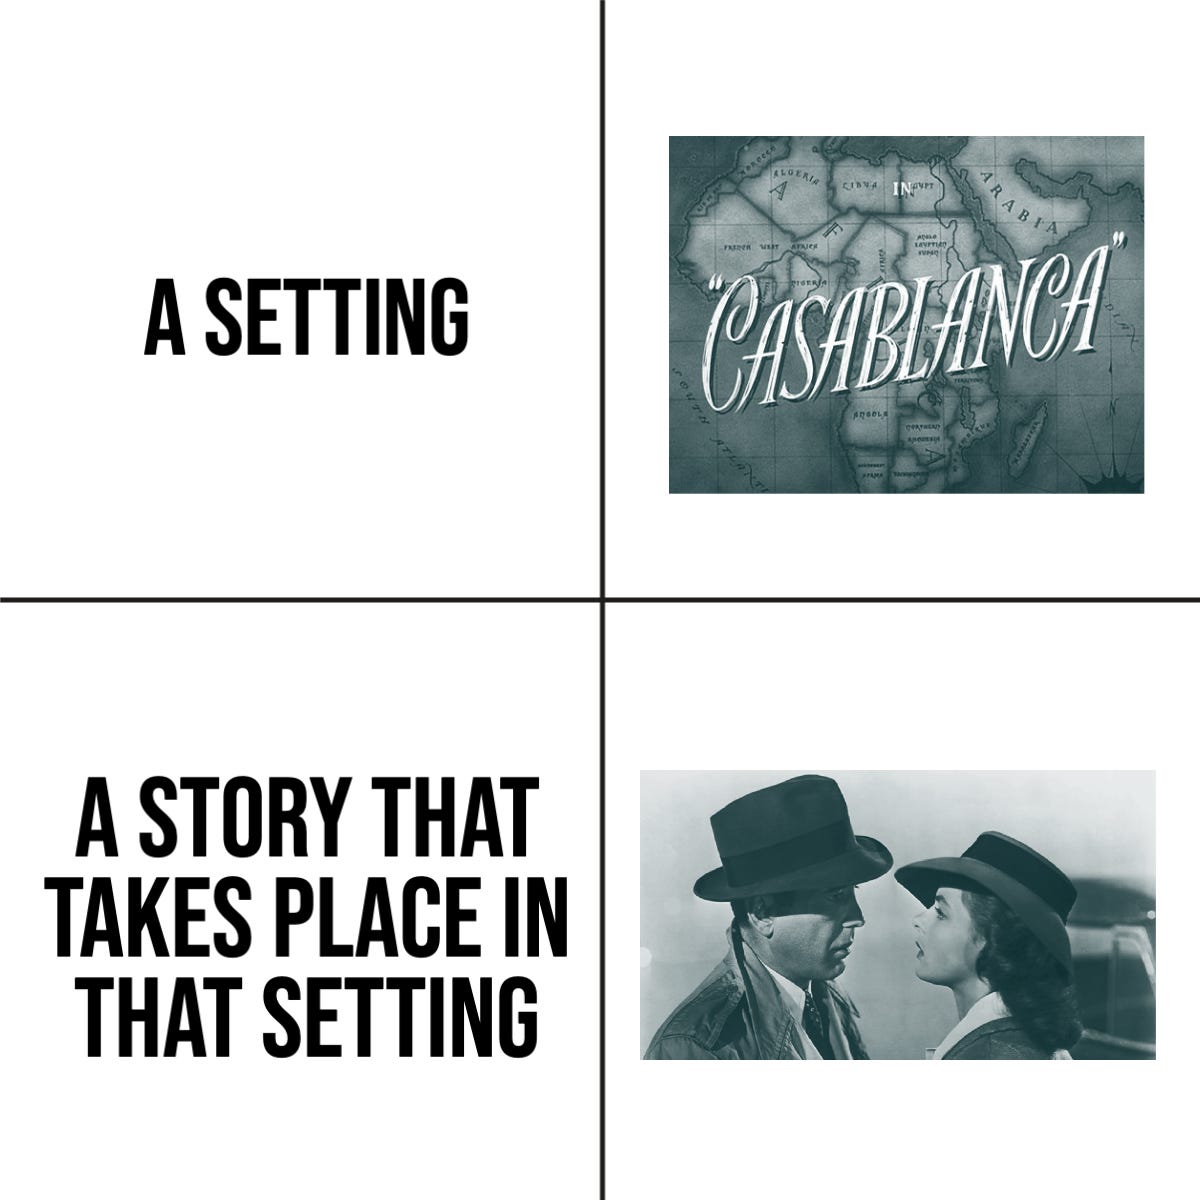 Meme format where a setting refers to the title screen of Casablanca and A story that takes place in that setting refers to a picture of Rick and Ilsa from that movie.